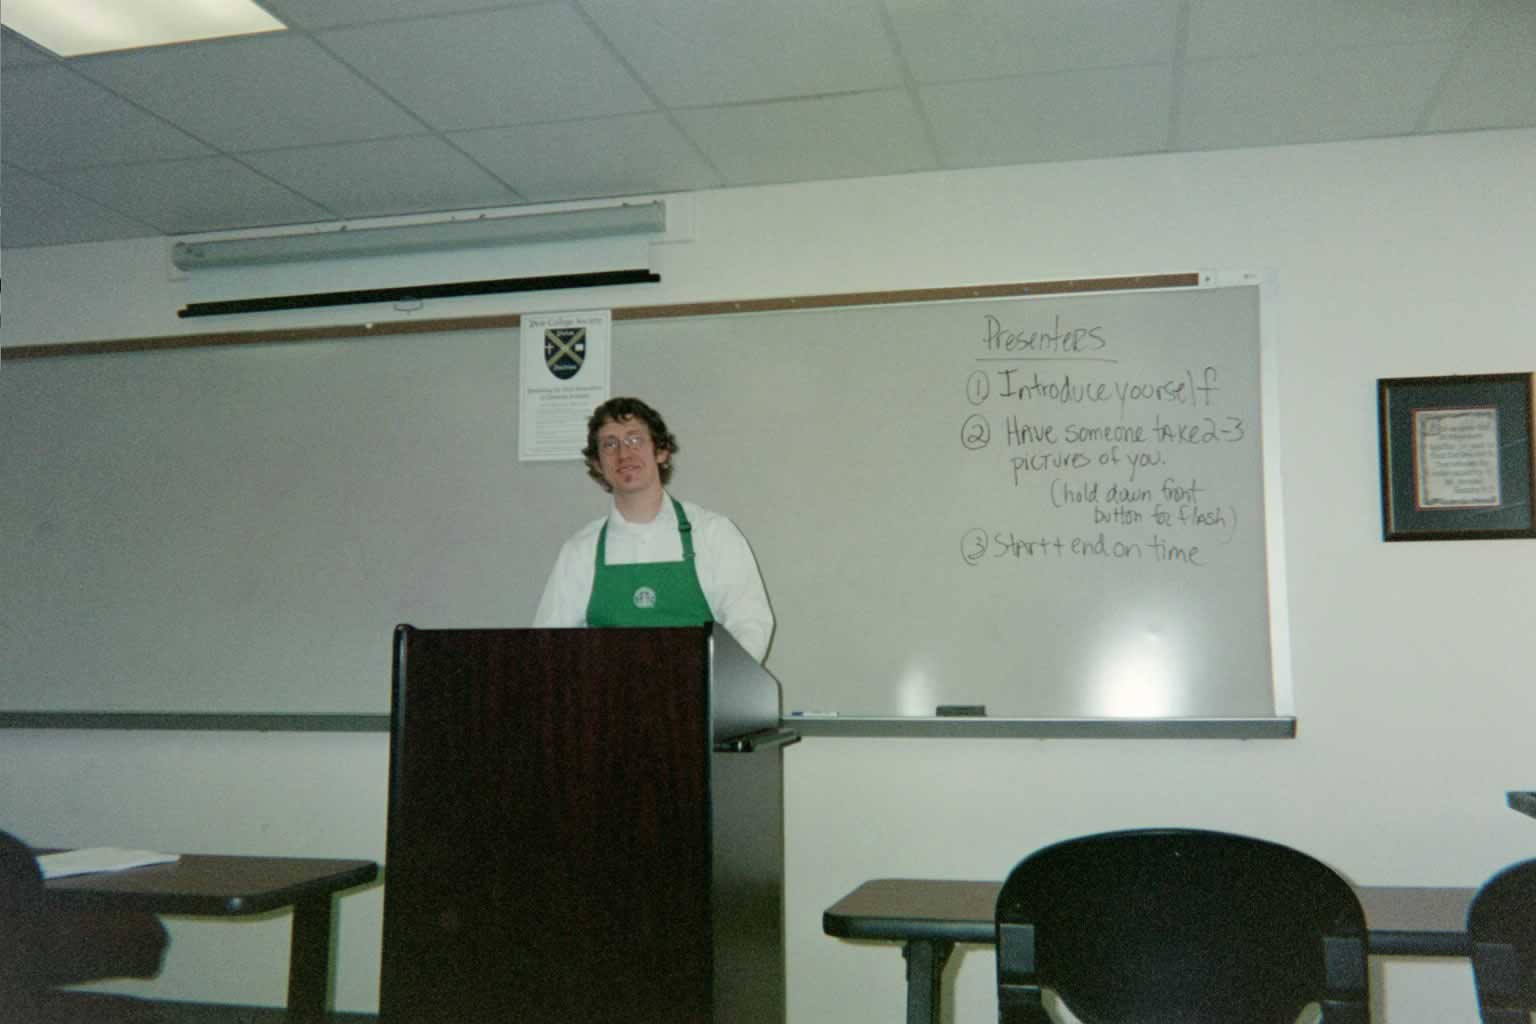 picture of man with glasses standing behind a podium while wearing a green apron